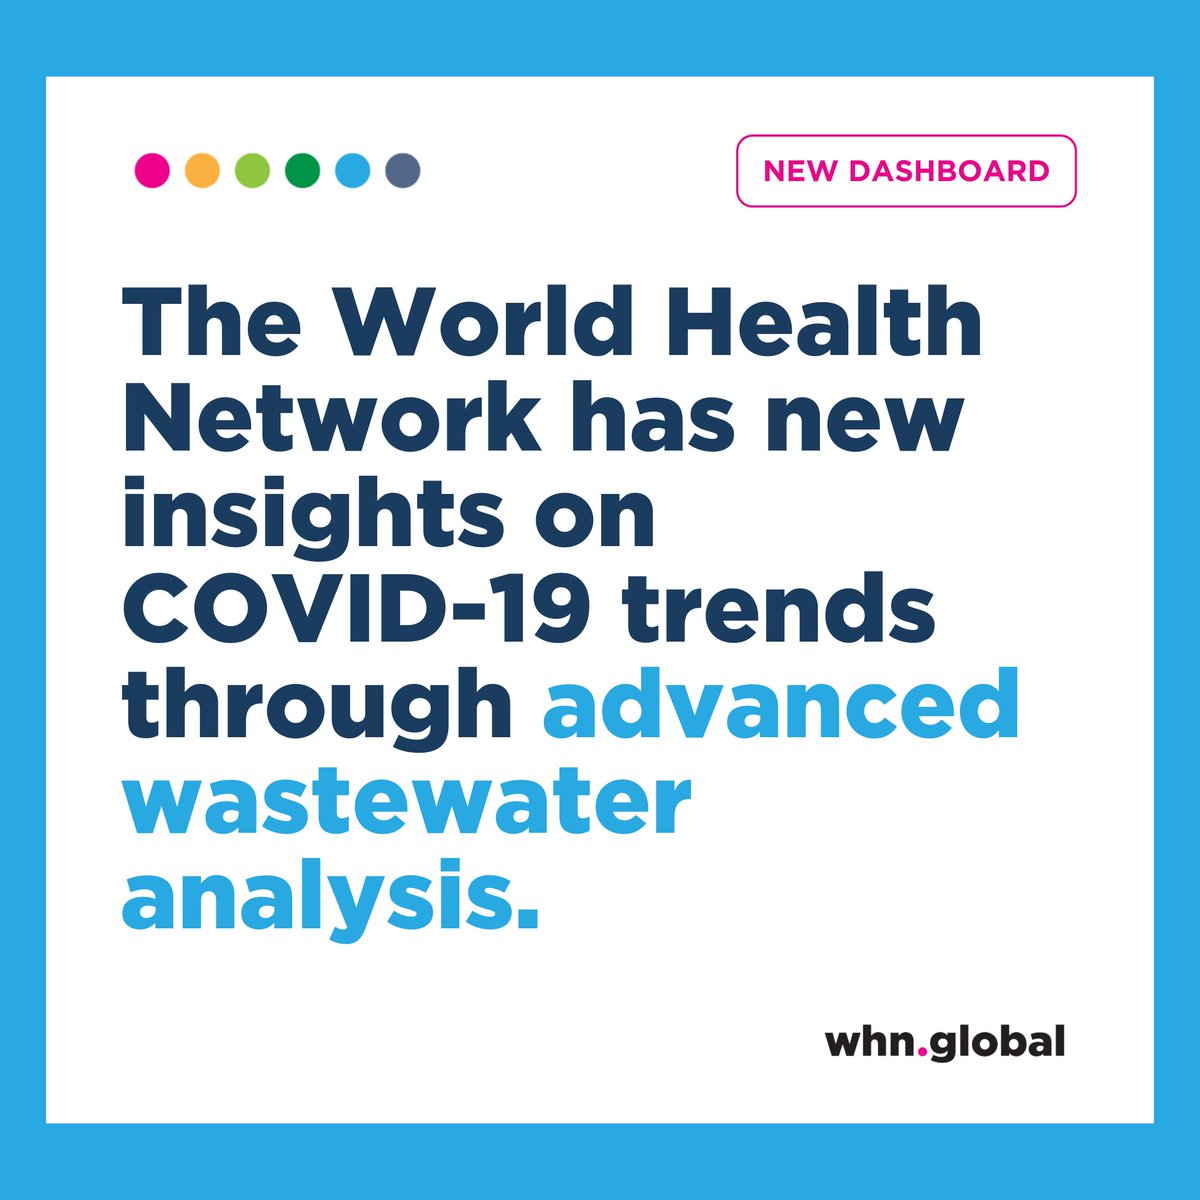 Discover how the latest wastewater surveillance integrates with epidemiological models to track COVID-19’s prevalence across the U.S. down to individual states. Using data from Biobot Analytics and refined by state-of-the-art methods, we're bringing accurate daily estimates of…